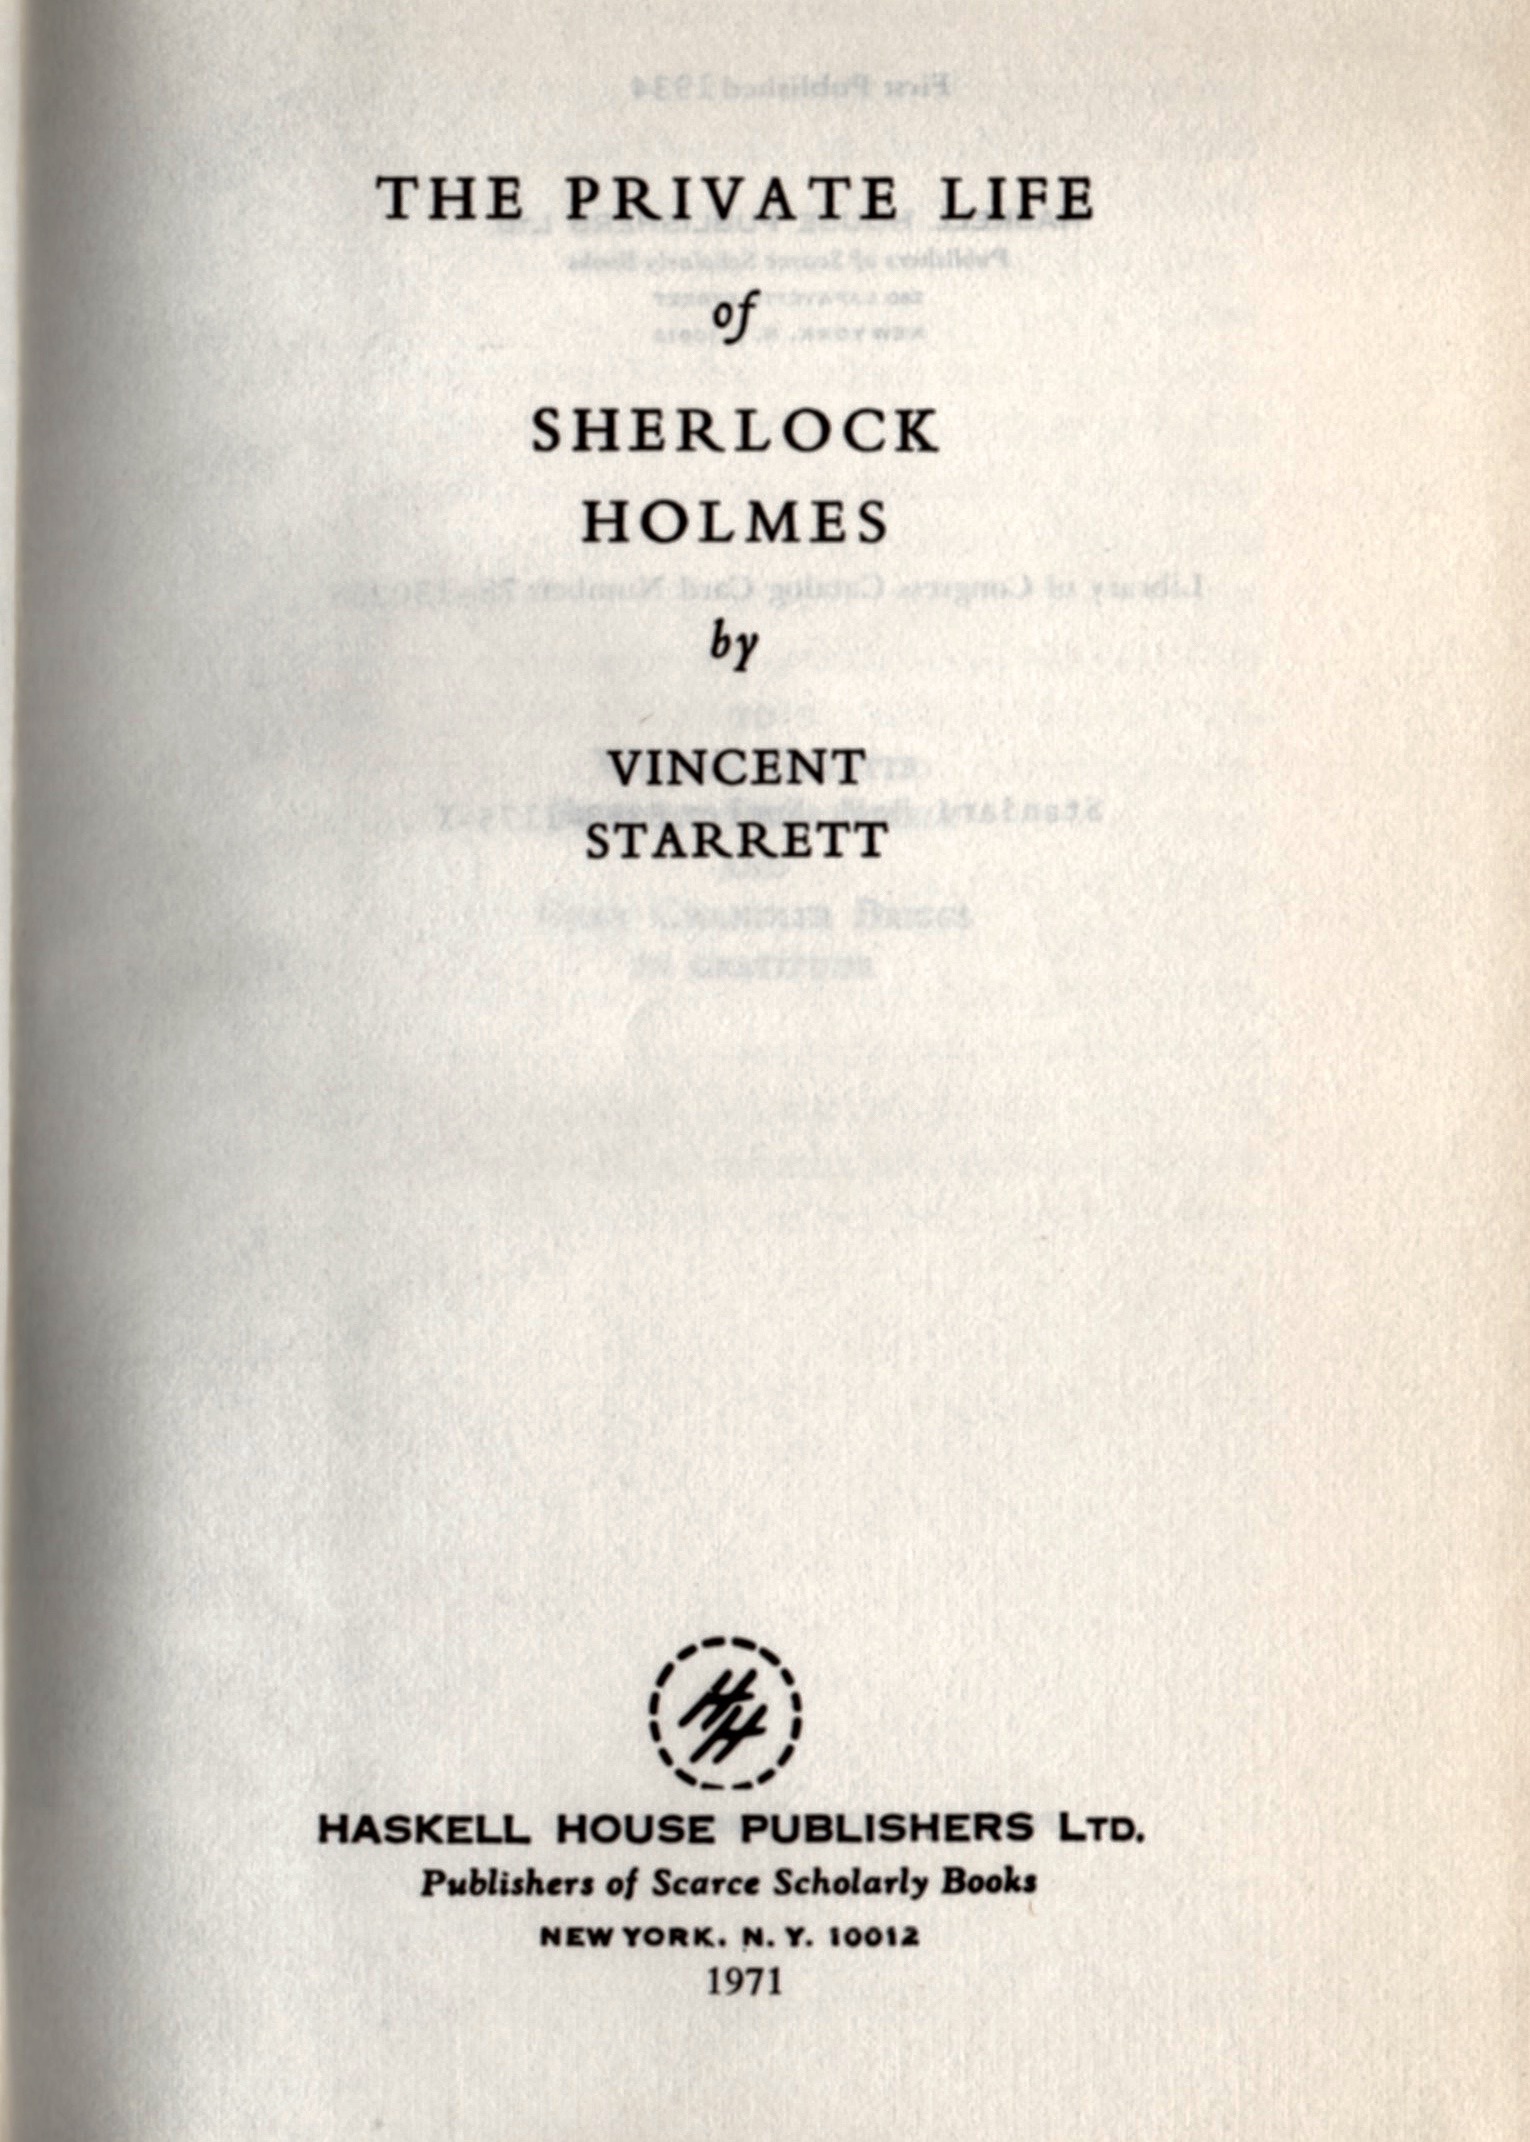 Haskell title page.jpg